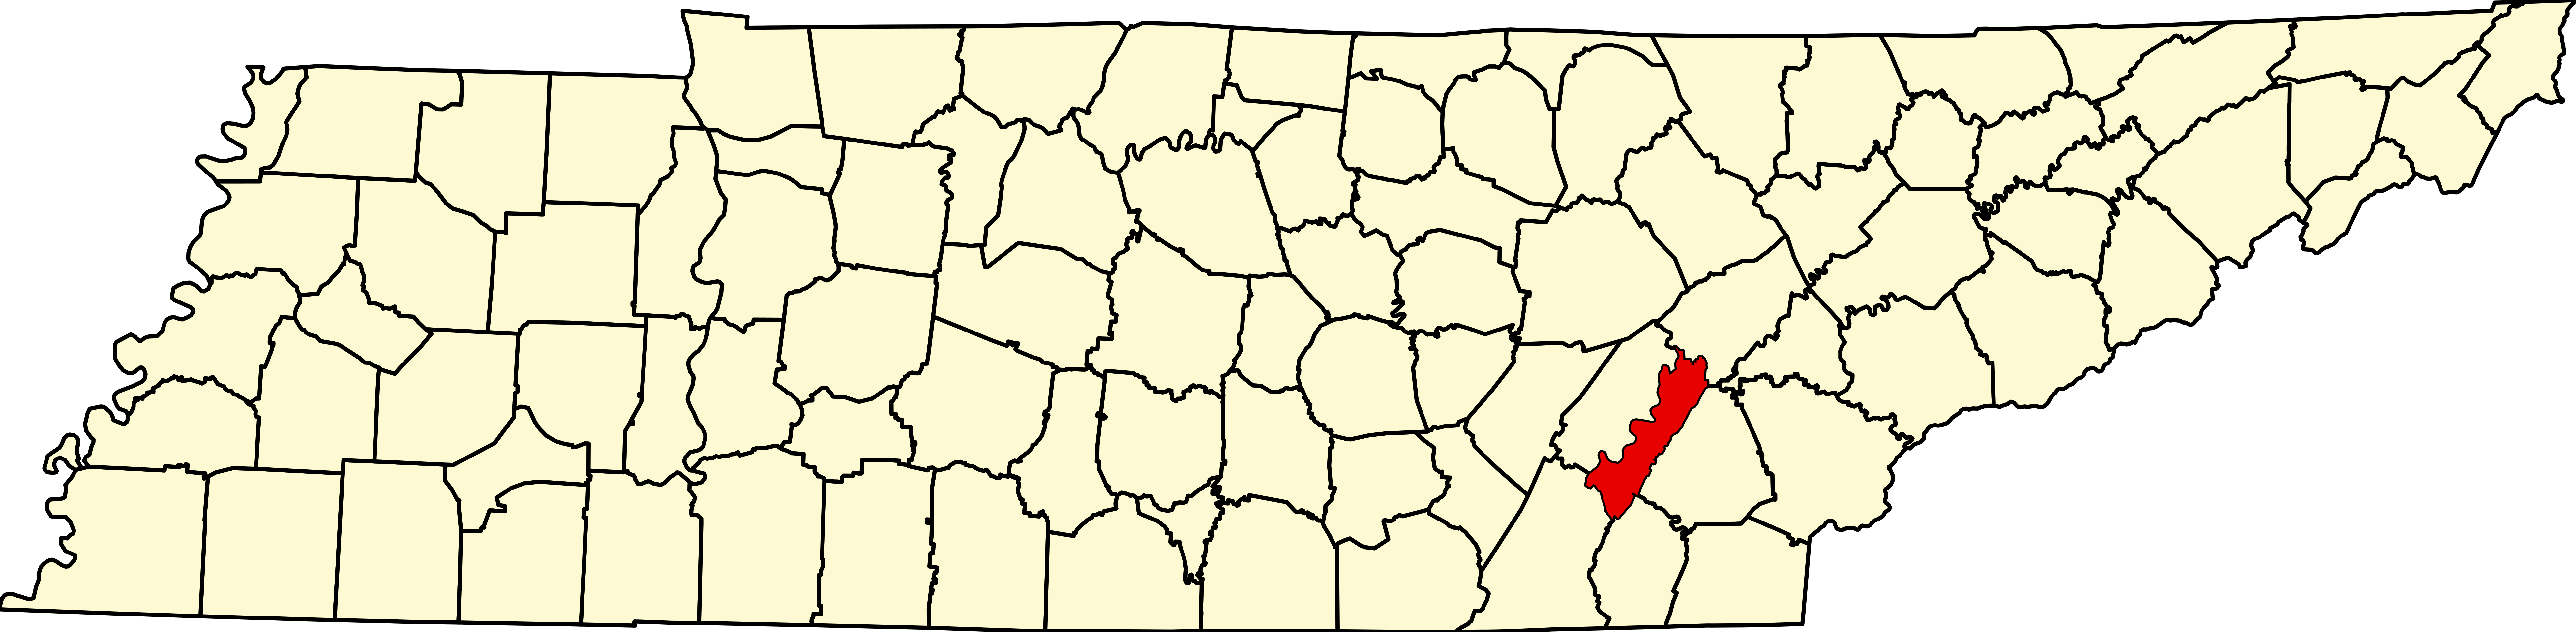 upload.wikimedia.org/wikipedia/commons/thumb/5/5d/Map_of_Tennessee_highlighting_Meigs_County.svg/7814px-Map_of_Tennessee_highlighting_Meigs_County.svg.png